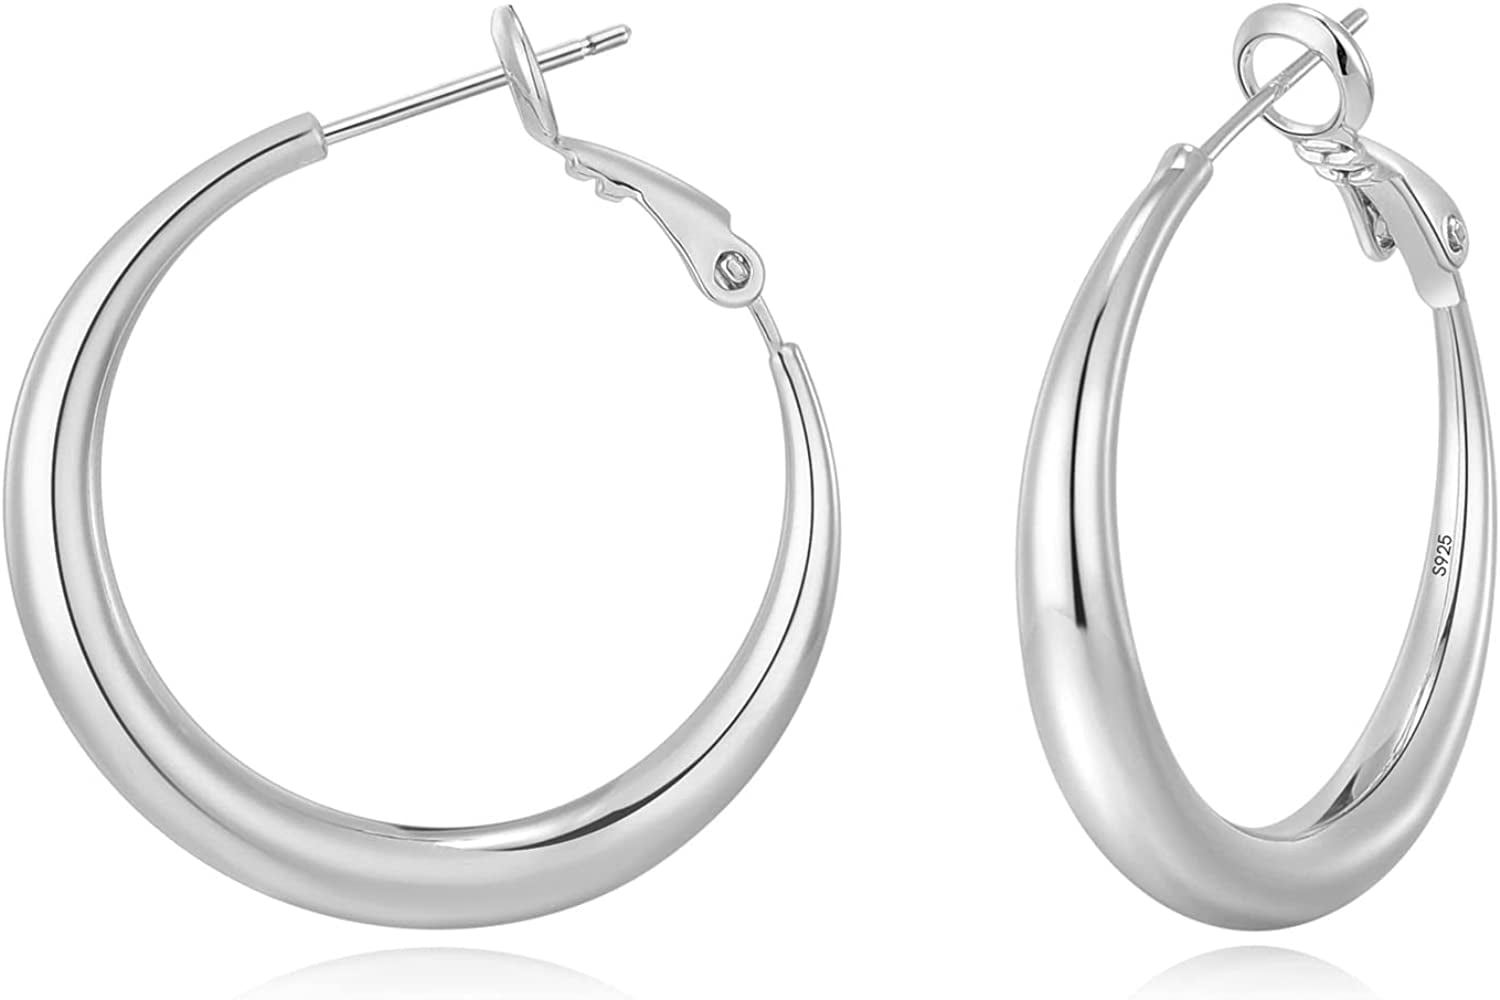 925 Sterling Silver Hoop Earrings,Plated Polished Rounded Hoop Earrings For  Women Girls(Silver,40mm/1.5 inches) - Walmart.com